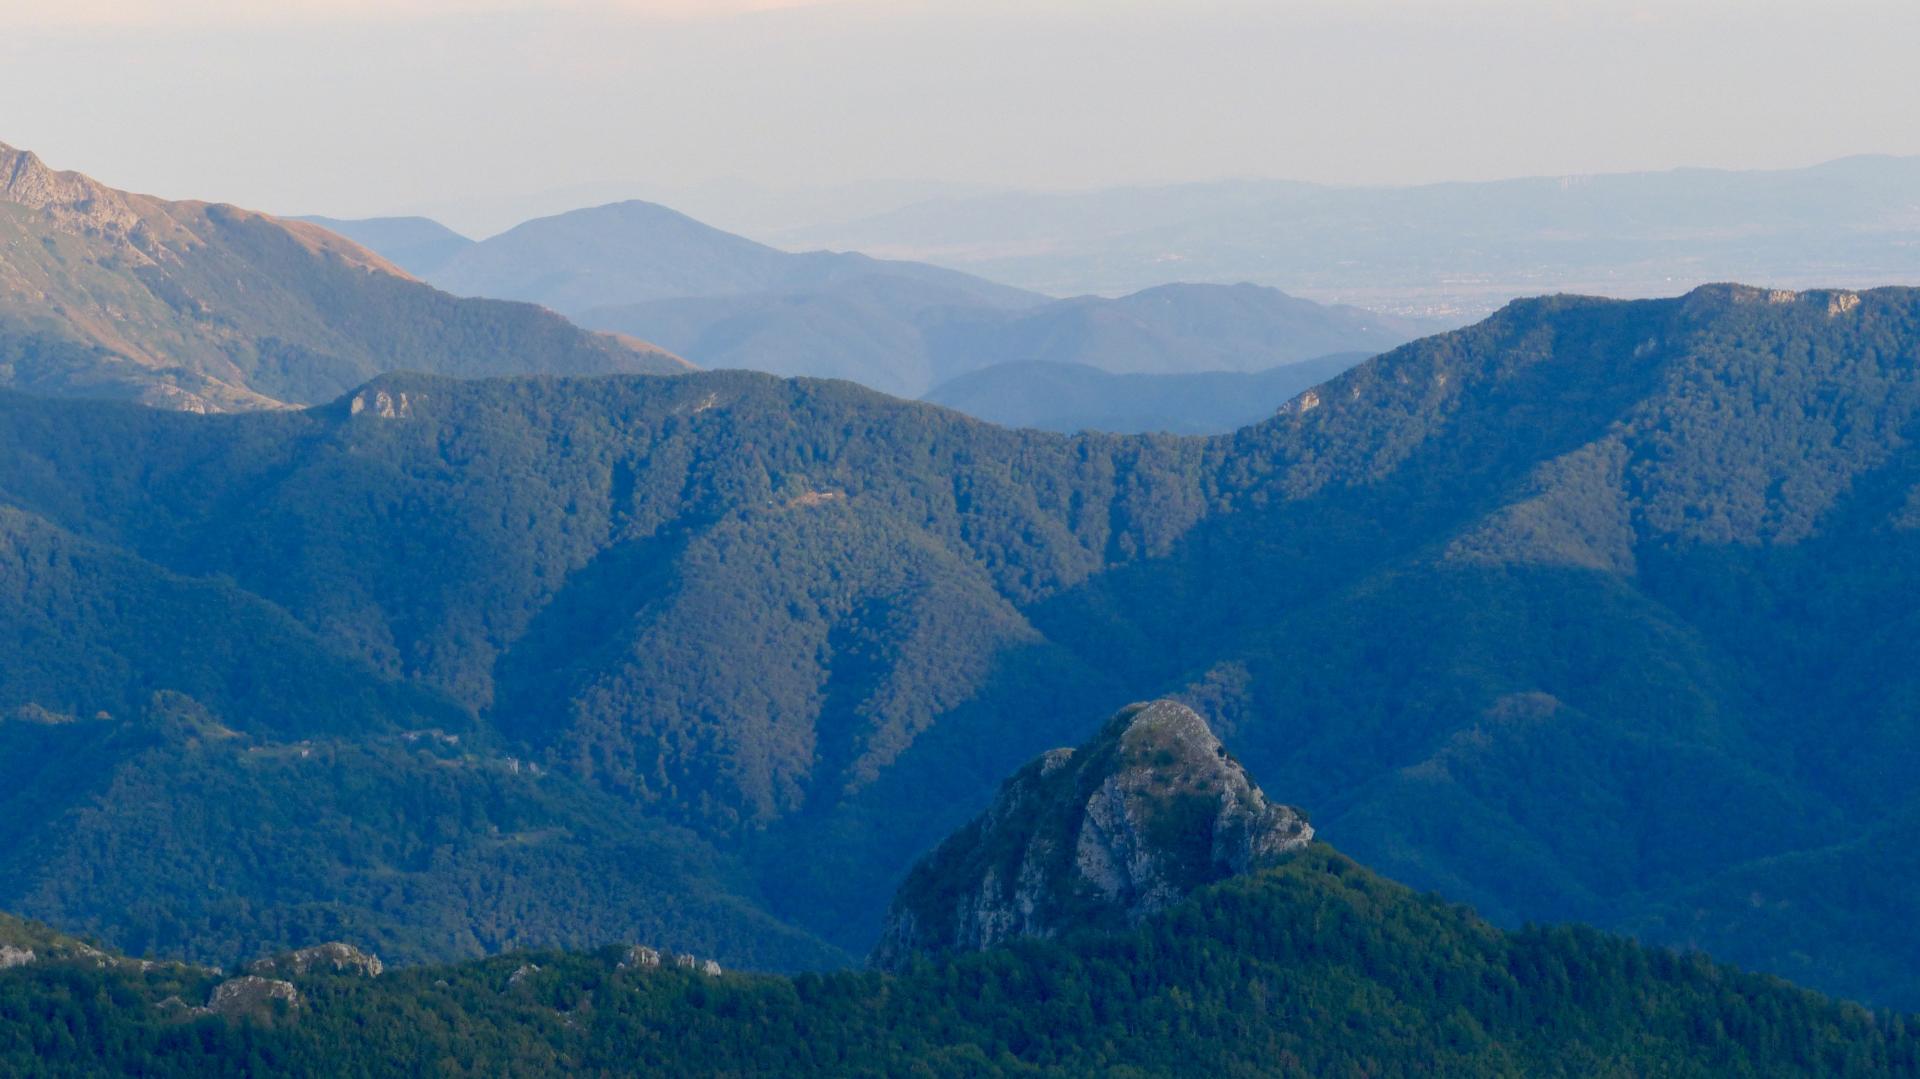 THE APUAN ALPS